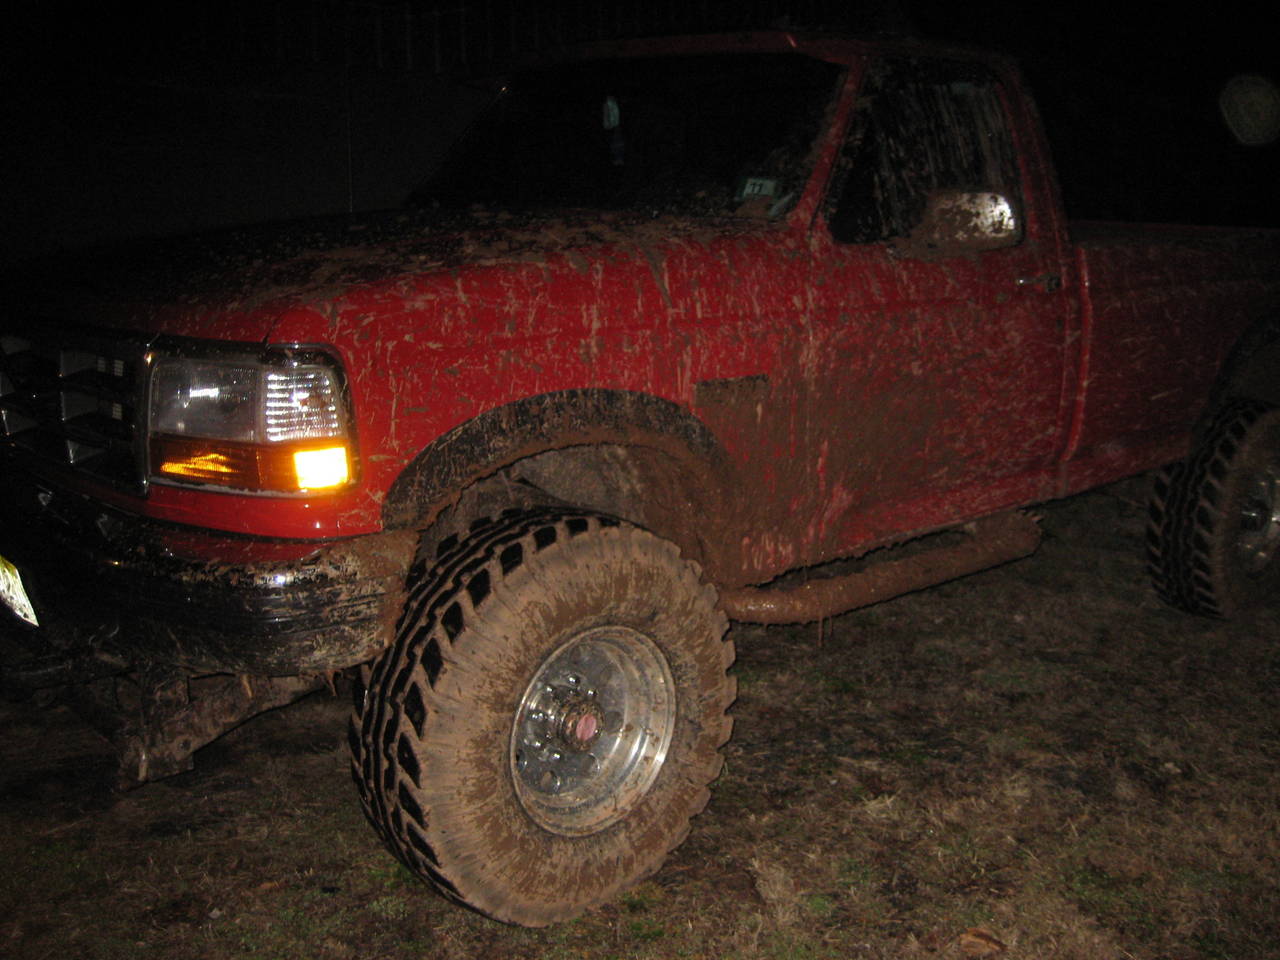 After pulling Chevy out of the mud